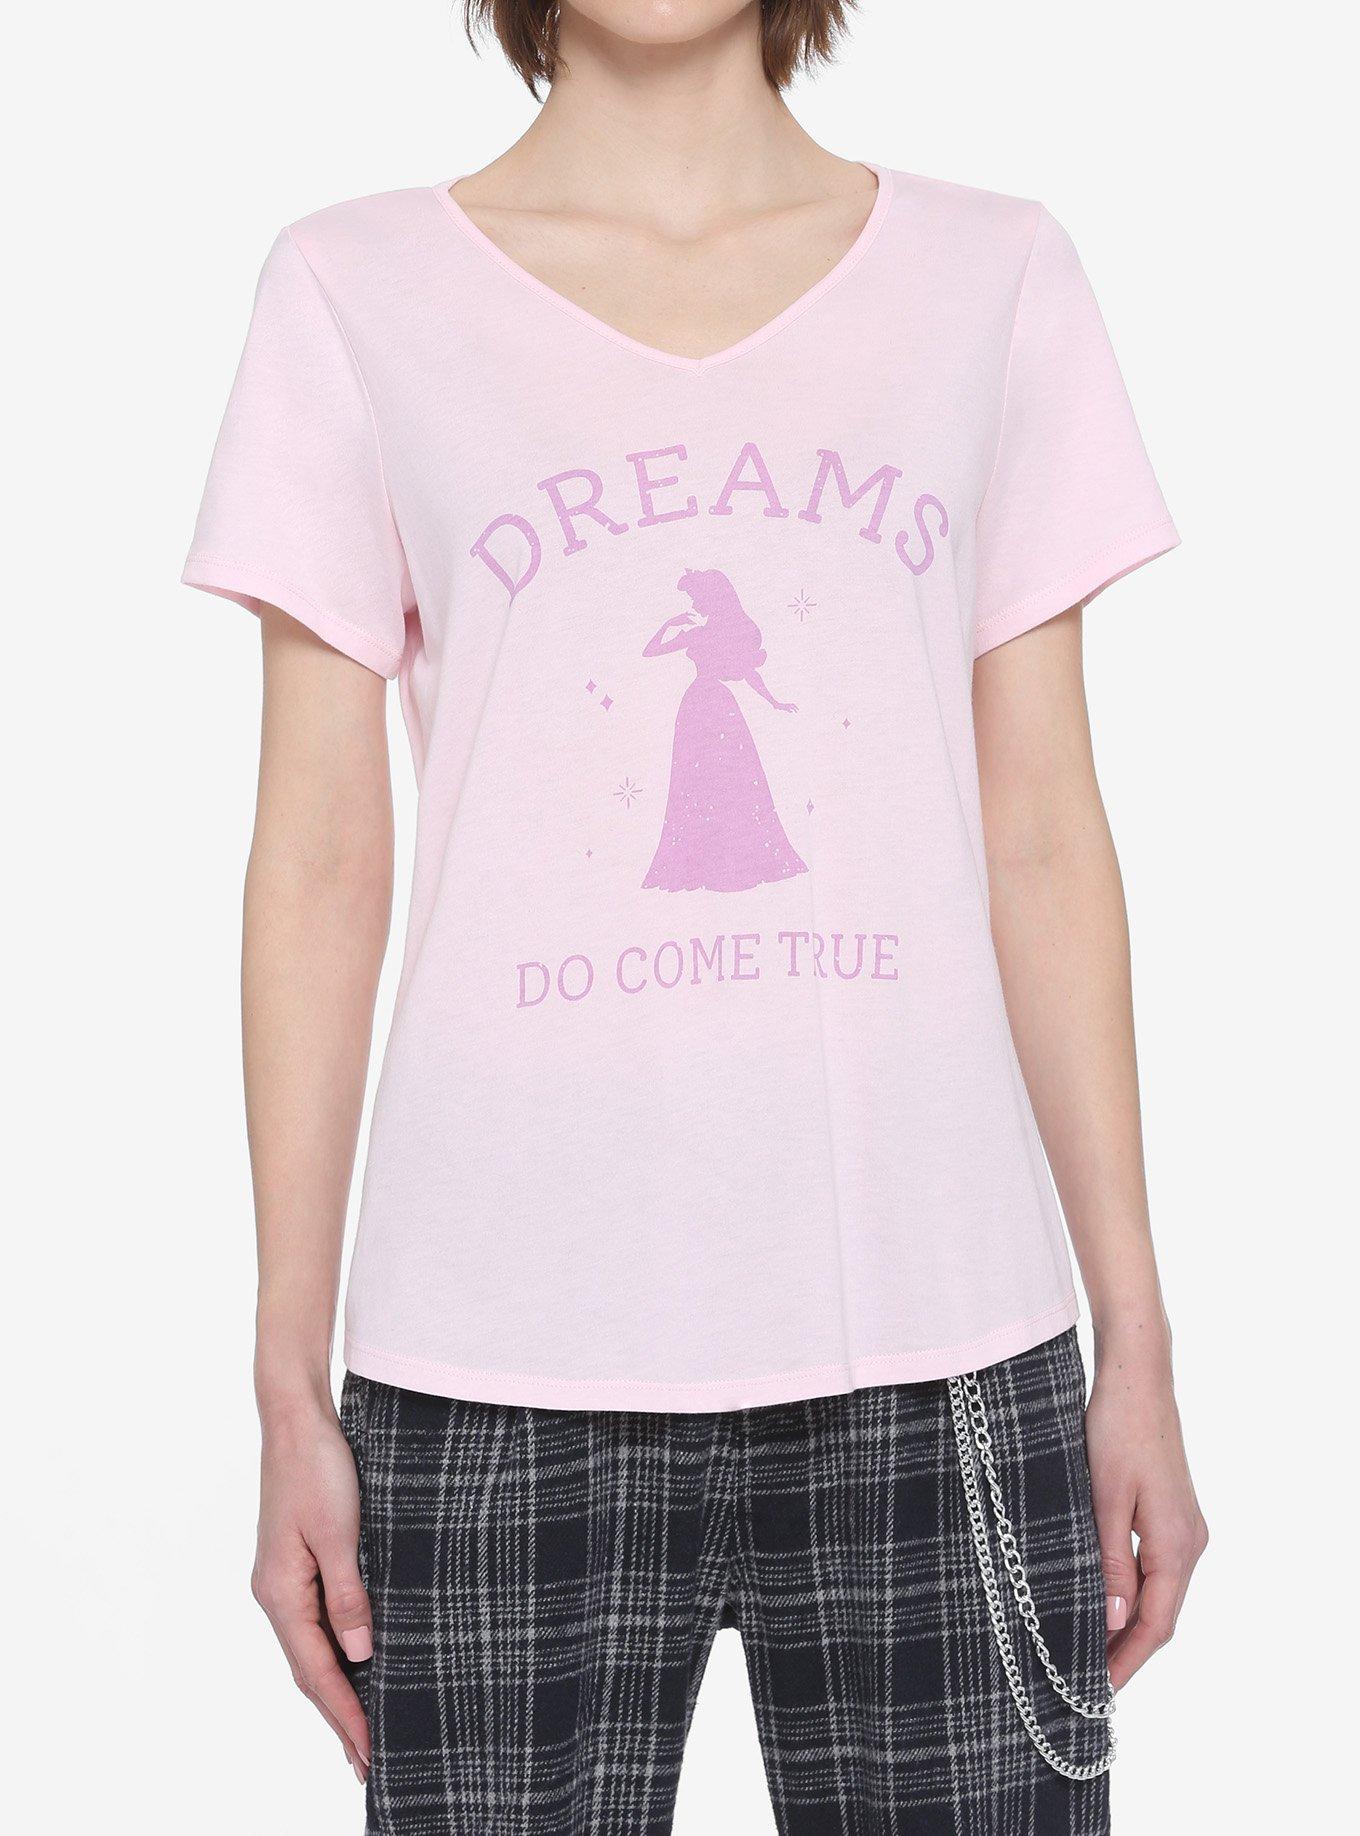 Disney Sleeping Beauty Dreams Do Come True Strappy Back Girls T-Shirt, PINK, hi-res